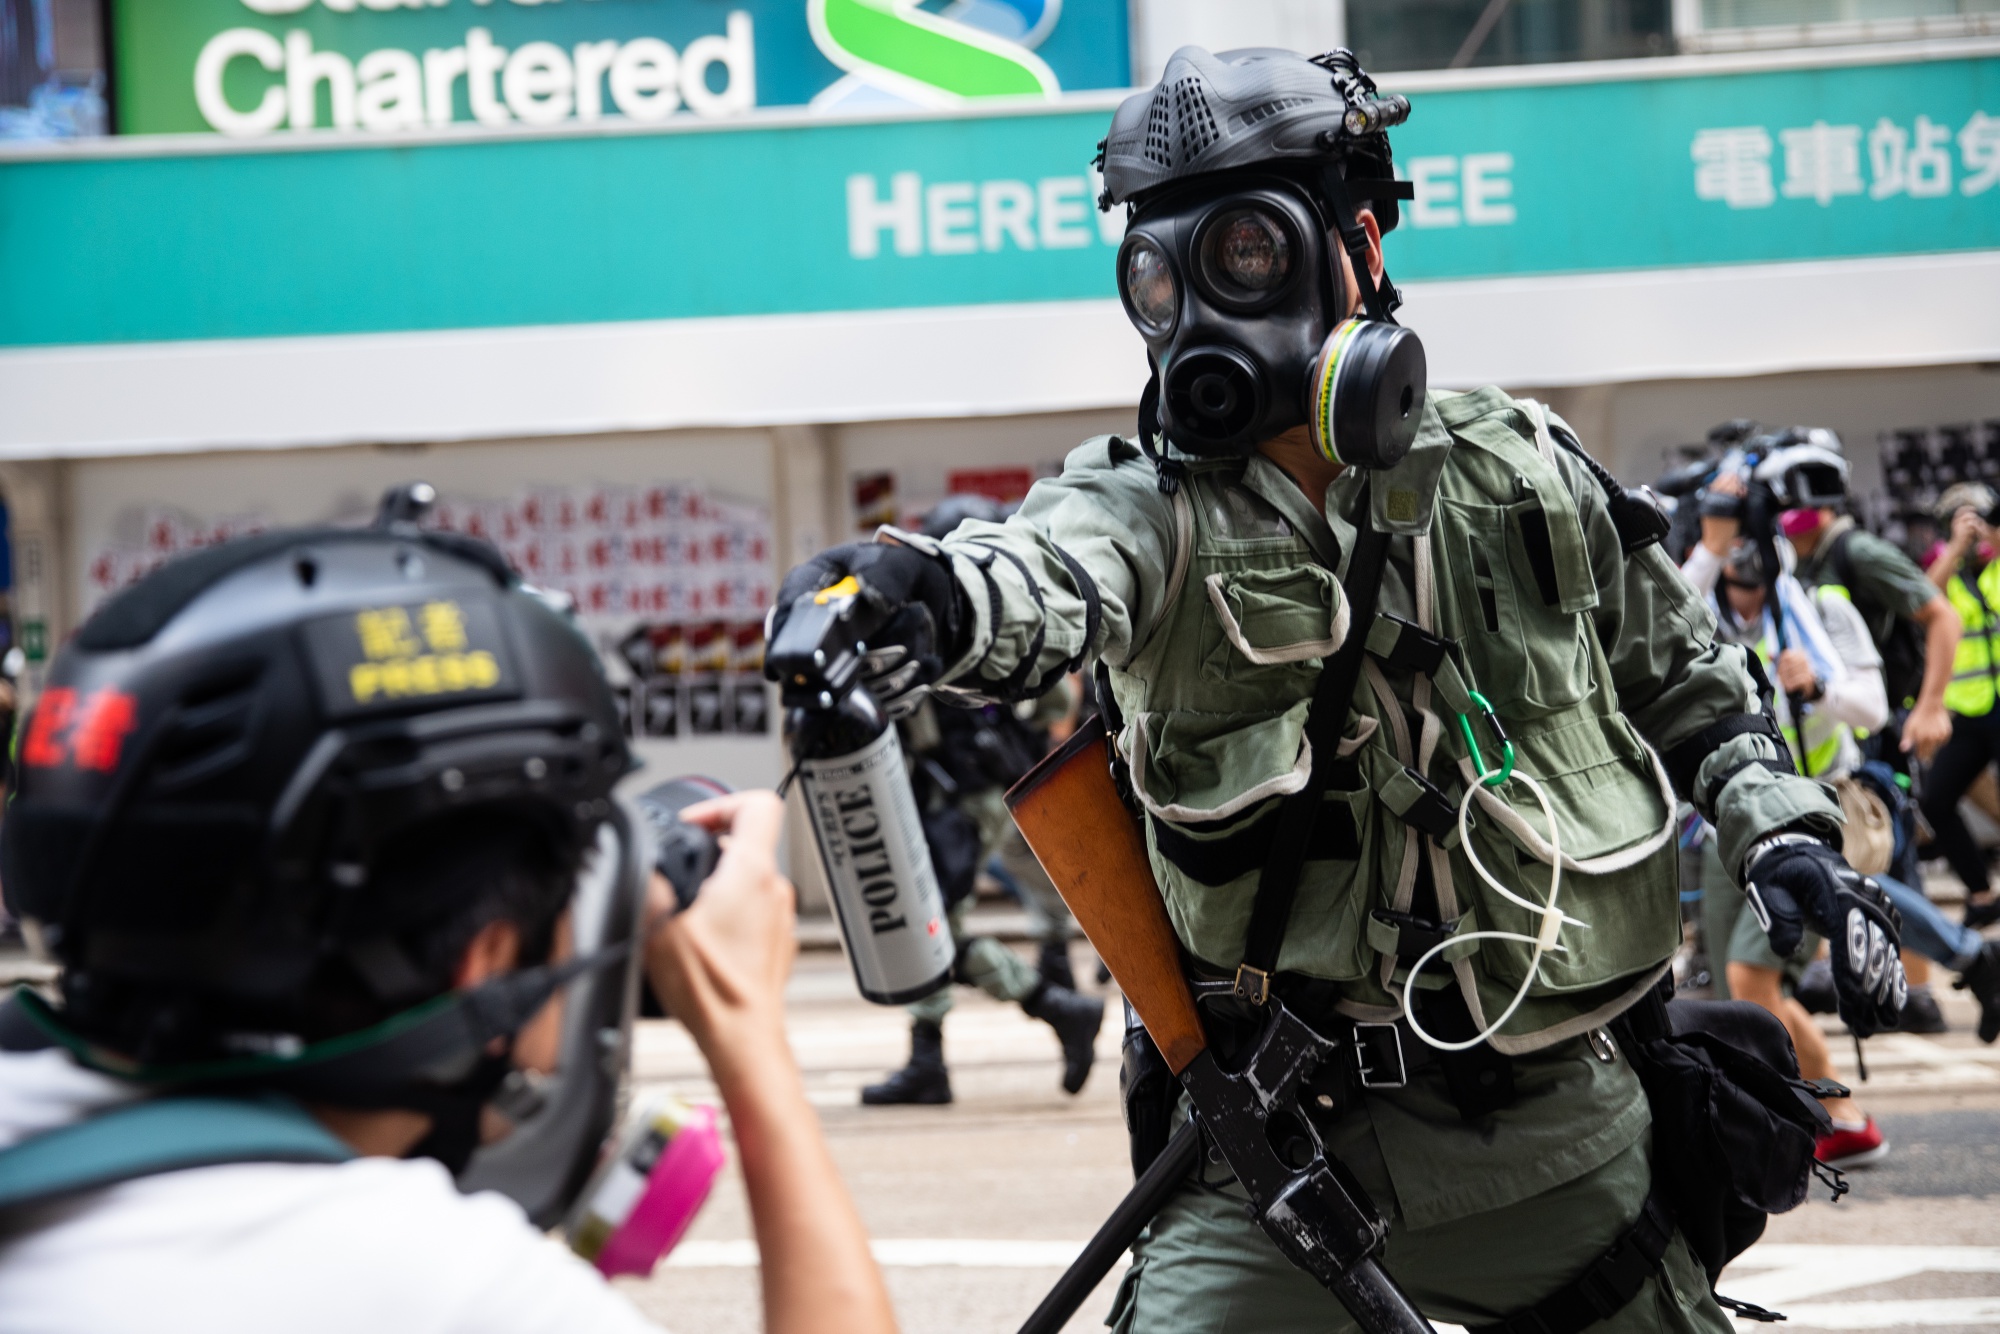 A riot police officer aims pepper spray at a journalist during a protest in Sept. 2019.